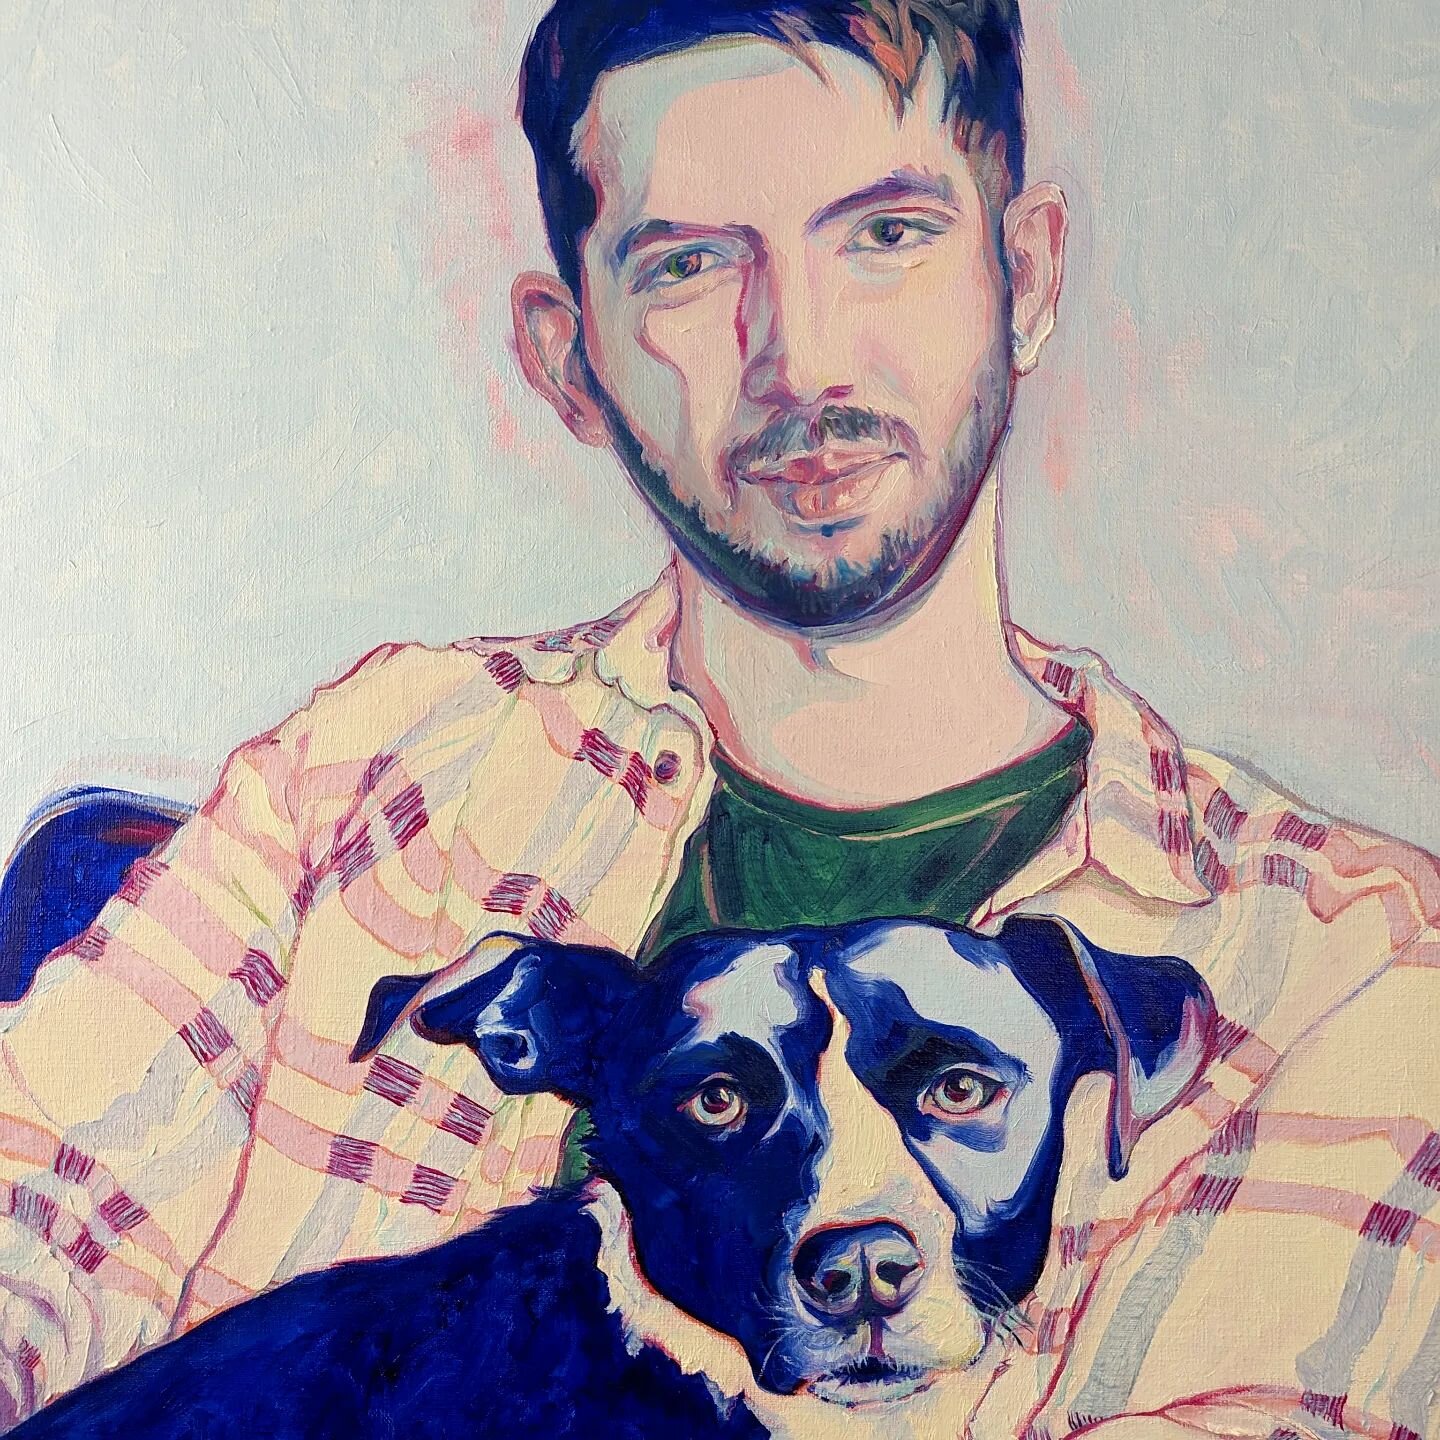 Detail of a handsome couple in a recently finished commission piece

#oreo #gooddog #dogportrait #petportrait #figurepainting #portraitpainting #portrait #portraiture #painting #oilpainting #artist #artistsoninstagram